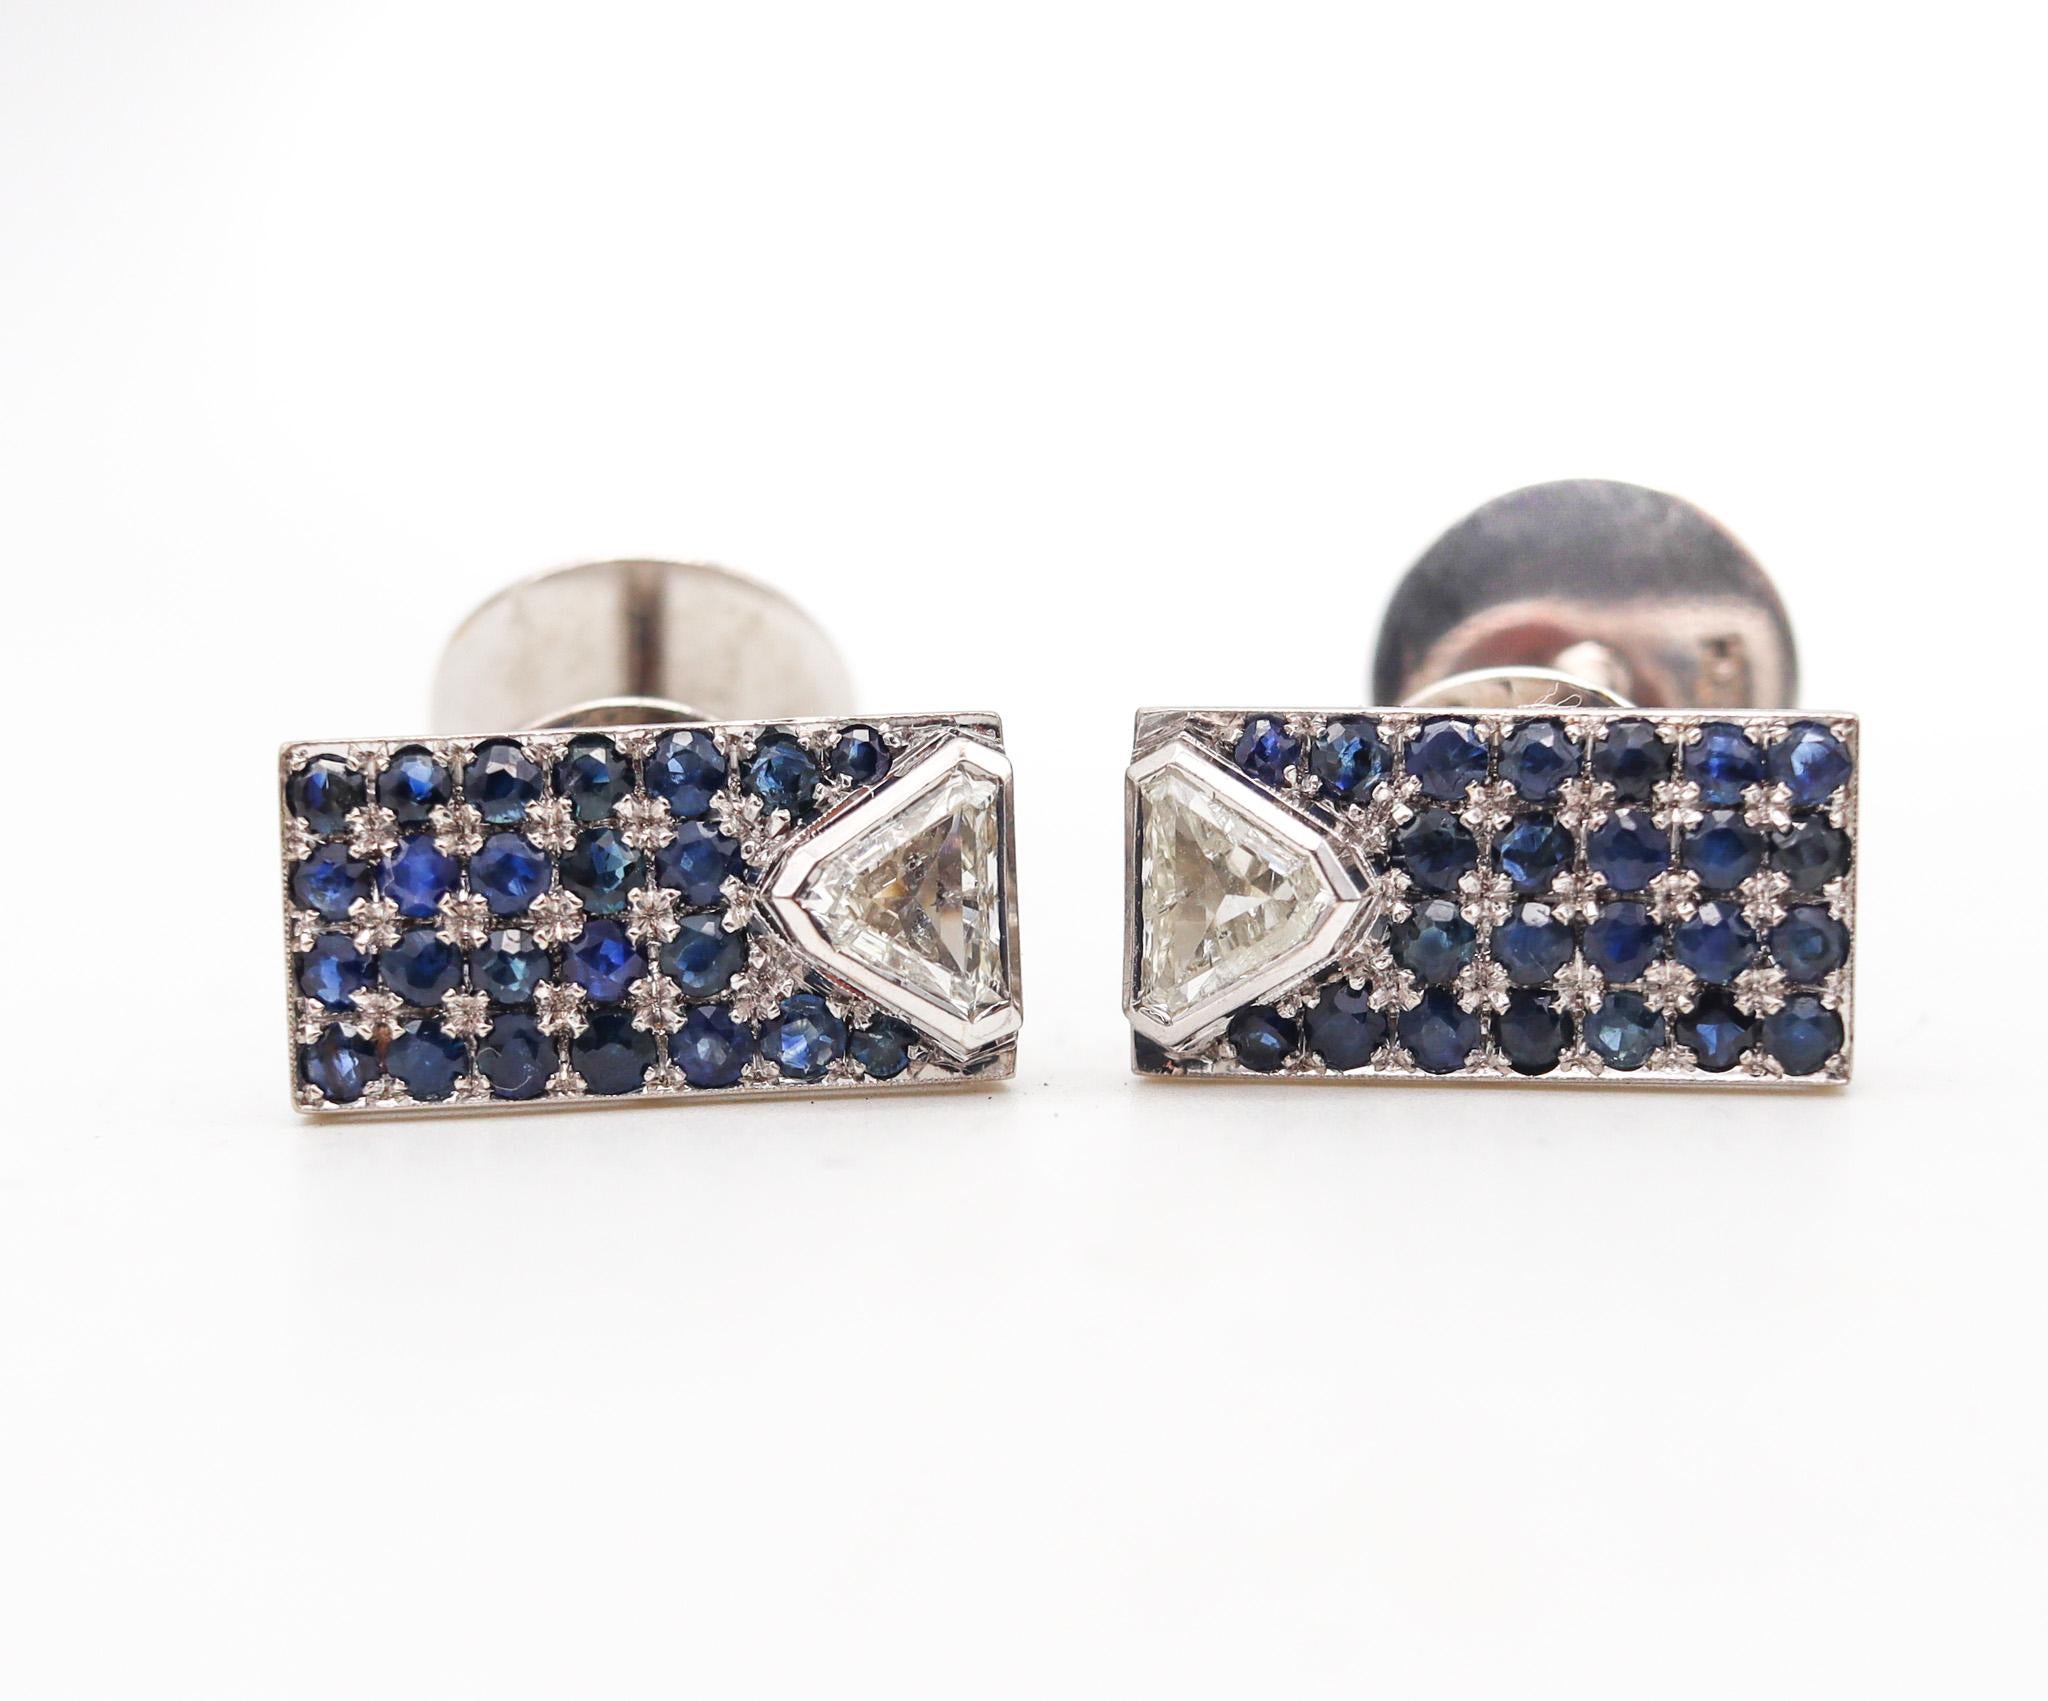 European mid century cufflinks with natural gemstones.

Very unusual and beautiful pair of cufflinks, created in Germany during the mid century period, back in the 1950's. Crafted with a rectangular shape in solid white gold of 18 karats with high